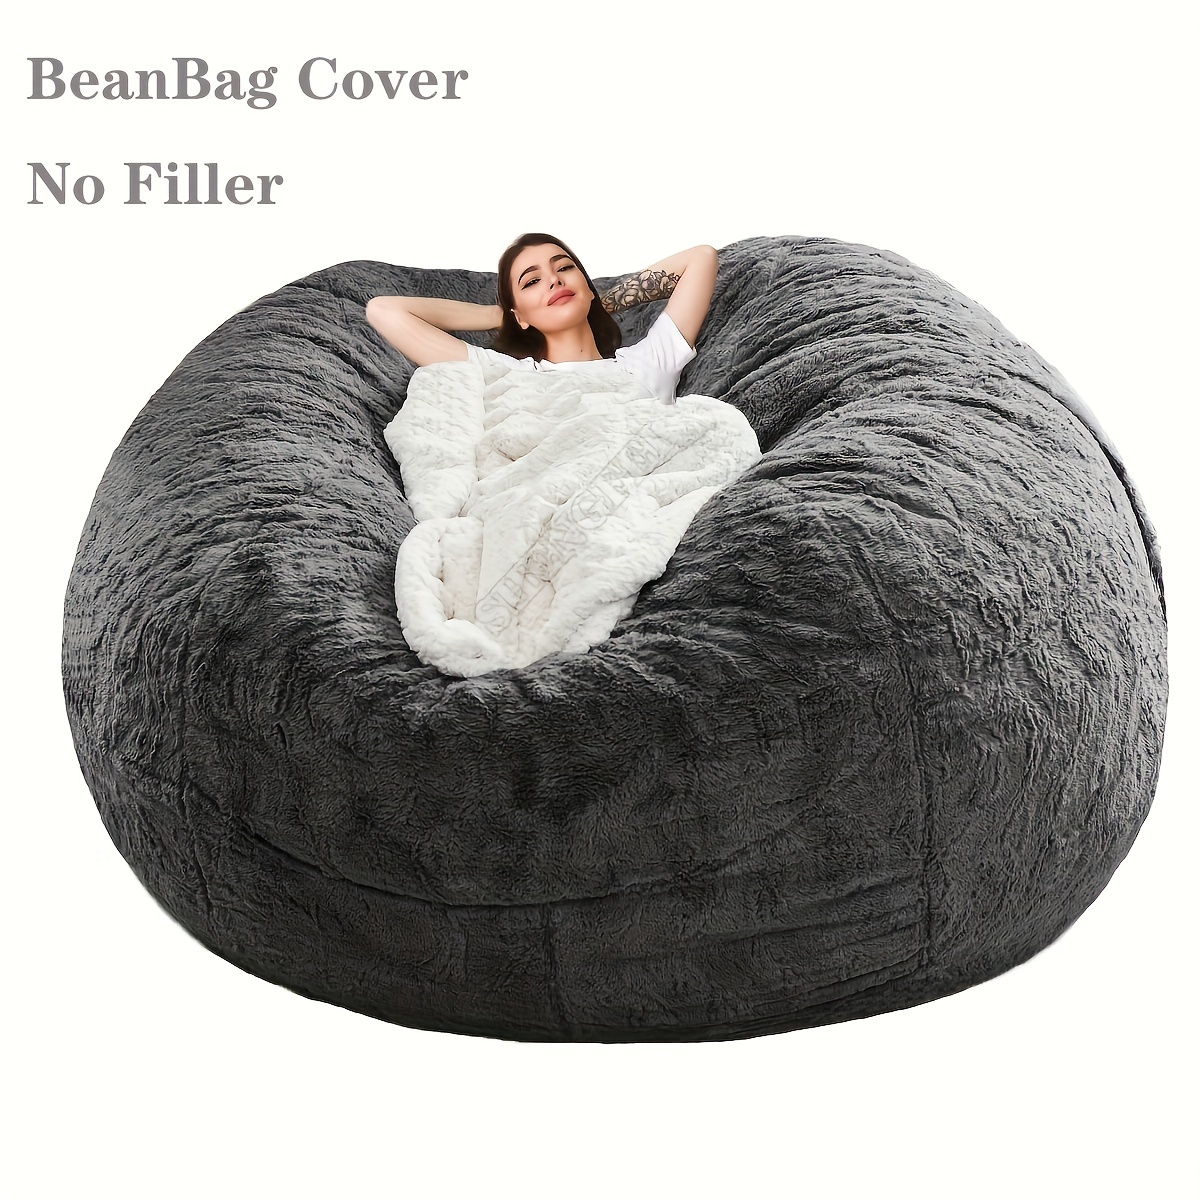 Bean Bag Chairs for Adults (It Was Only Cover,Not A Full beanbag) Large Bean Bag Cover Light Grey Big Round Soft Fluffy PV Velvet Comfy Giant